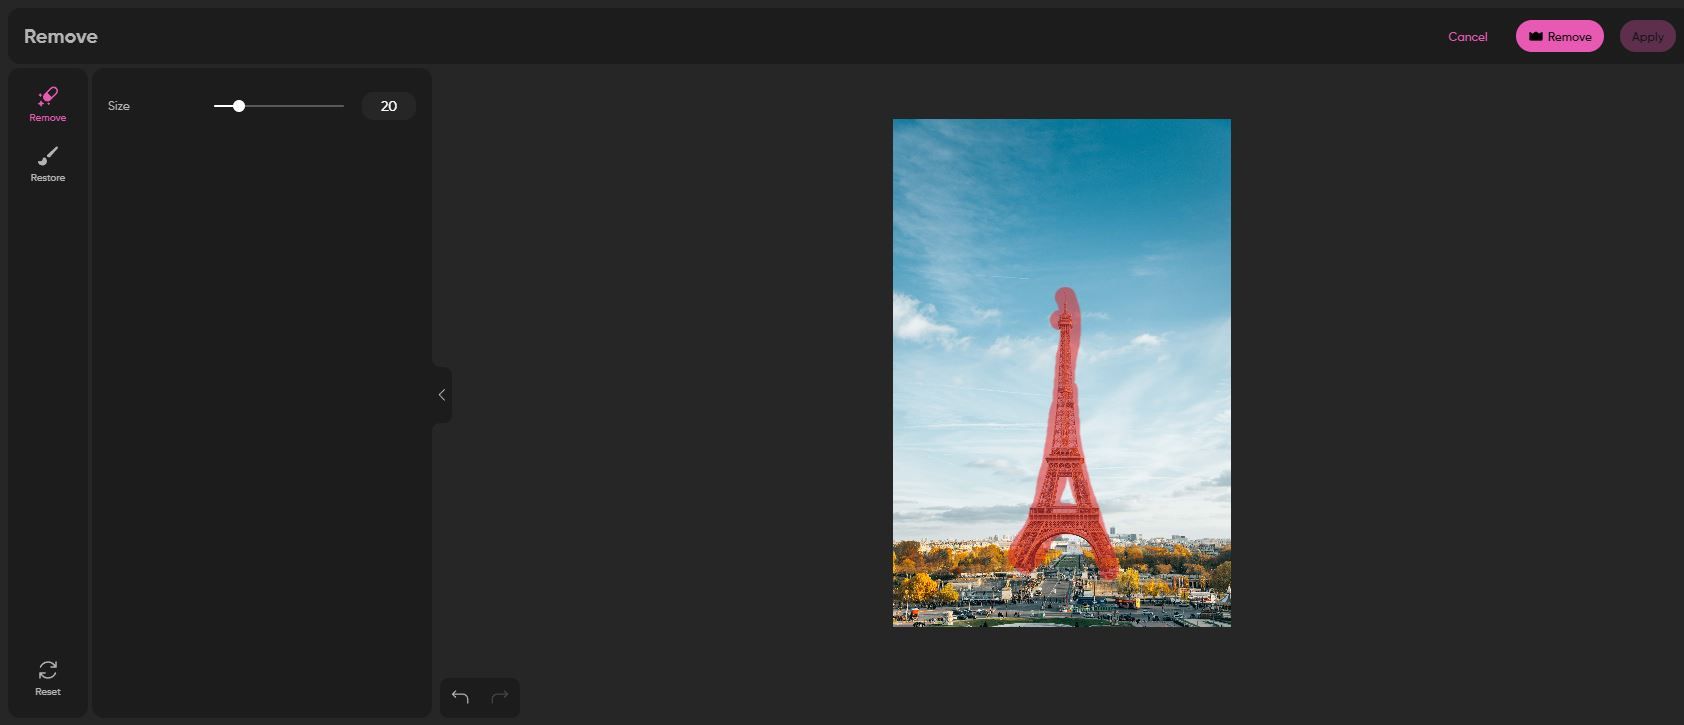 A Screenshot of Removing an Object From an Image Using Picsart